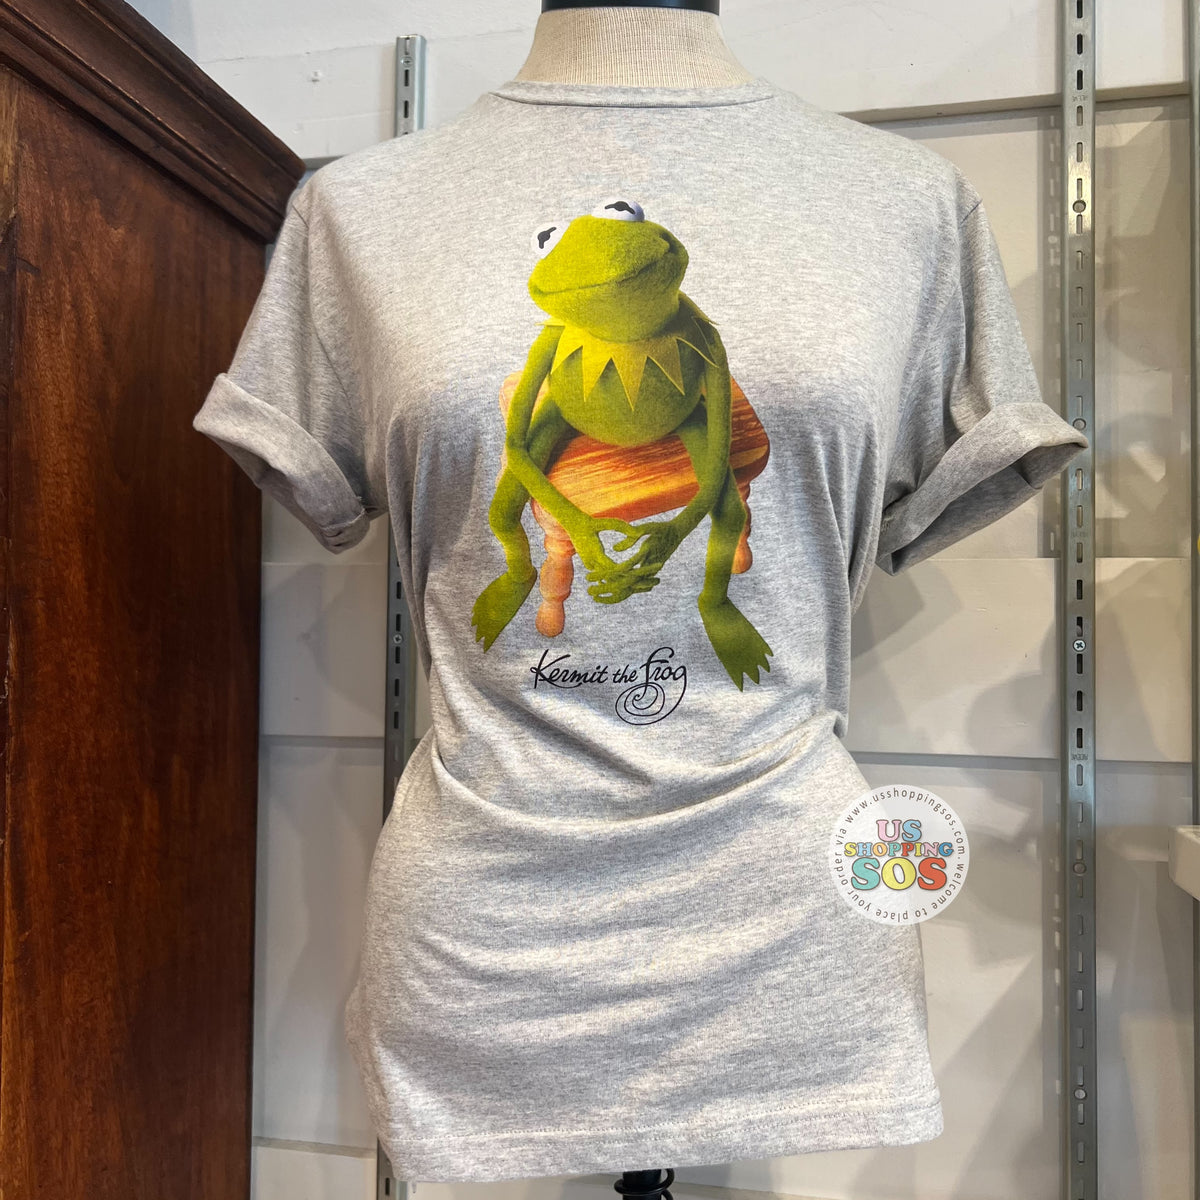 DLR - The Grey Kermit Muppets Graphic Frog T-shirt the USShoppingSOS (Adult) — Heather